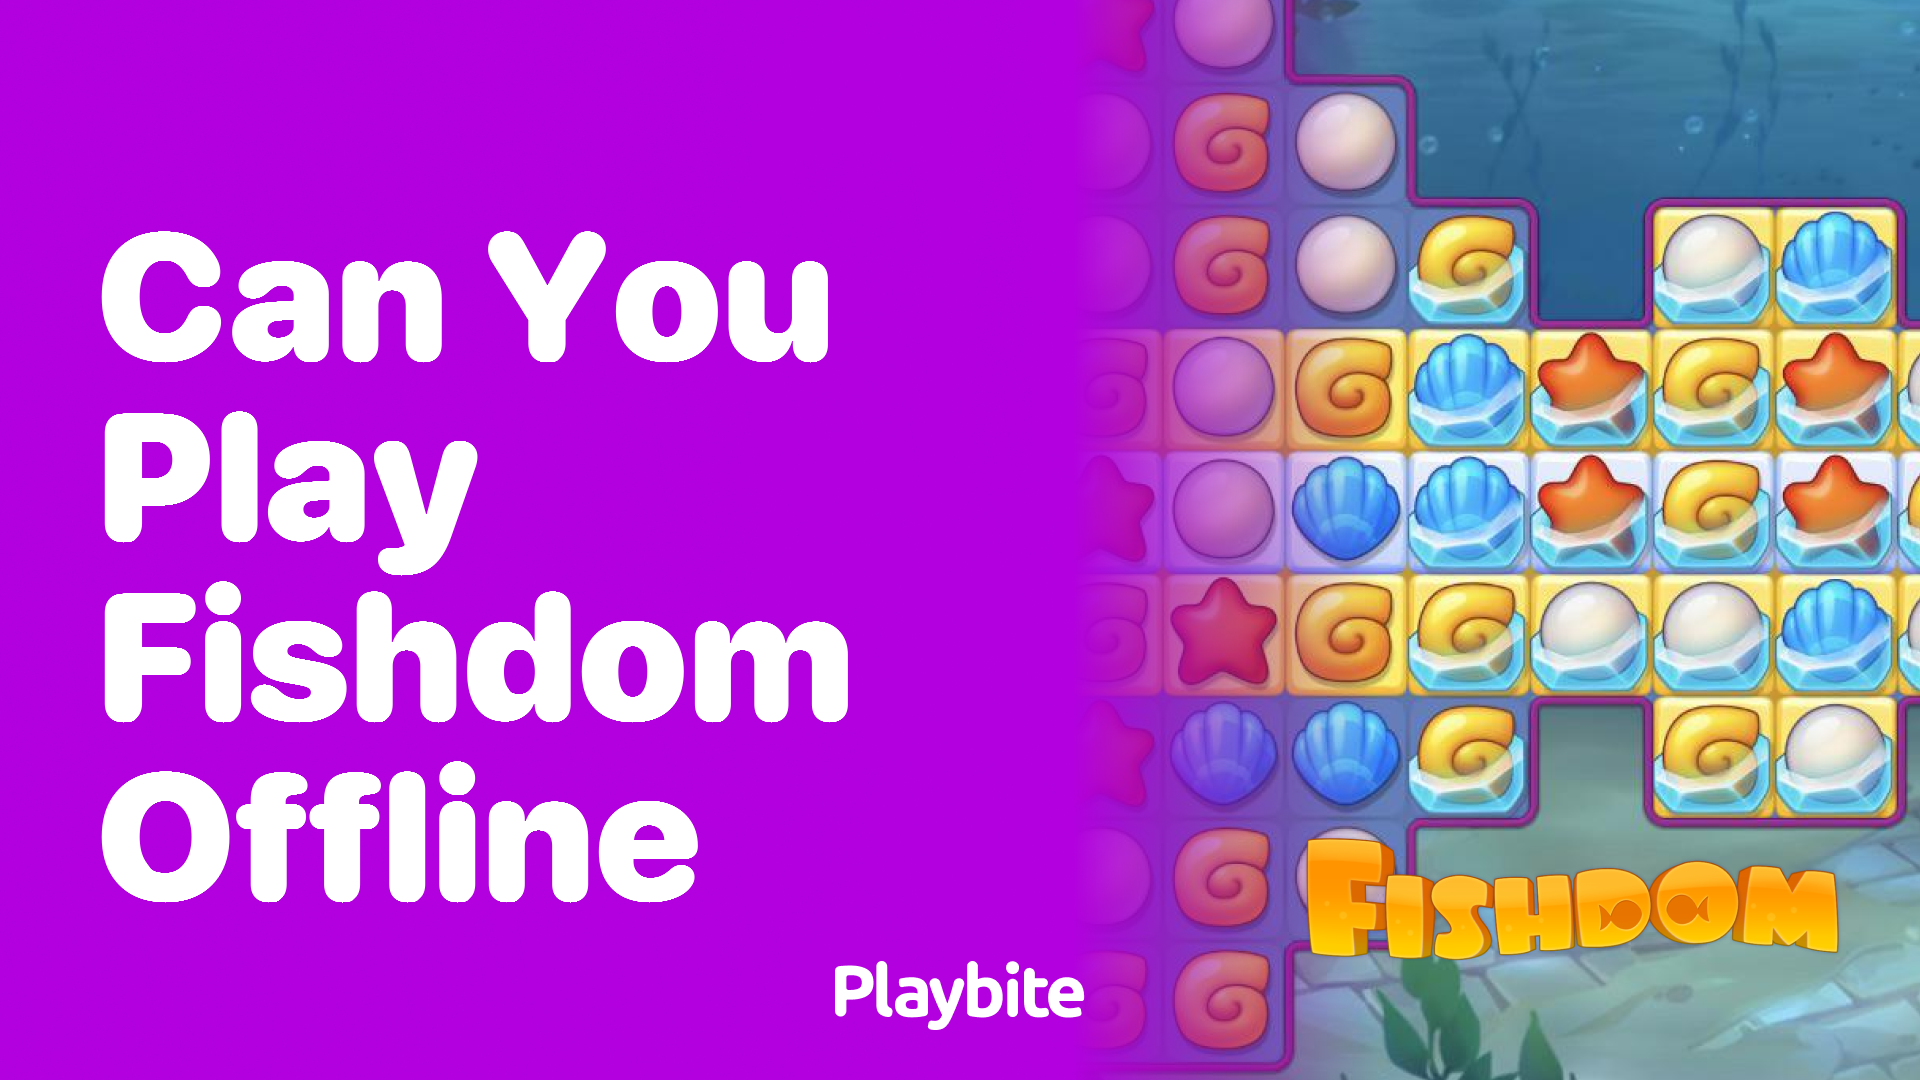 Can You Play Fishdom Offline?